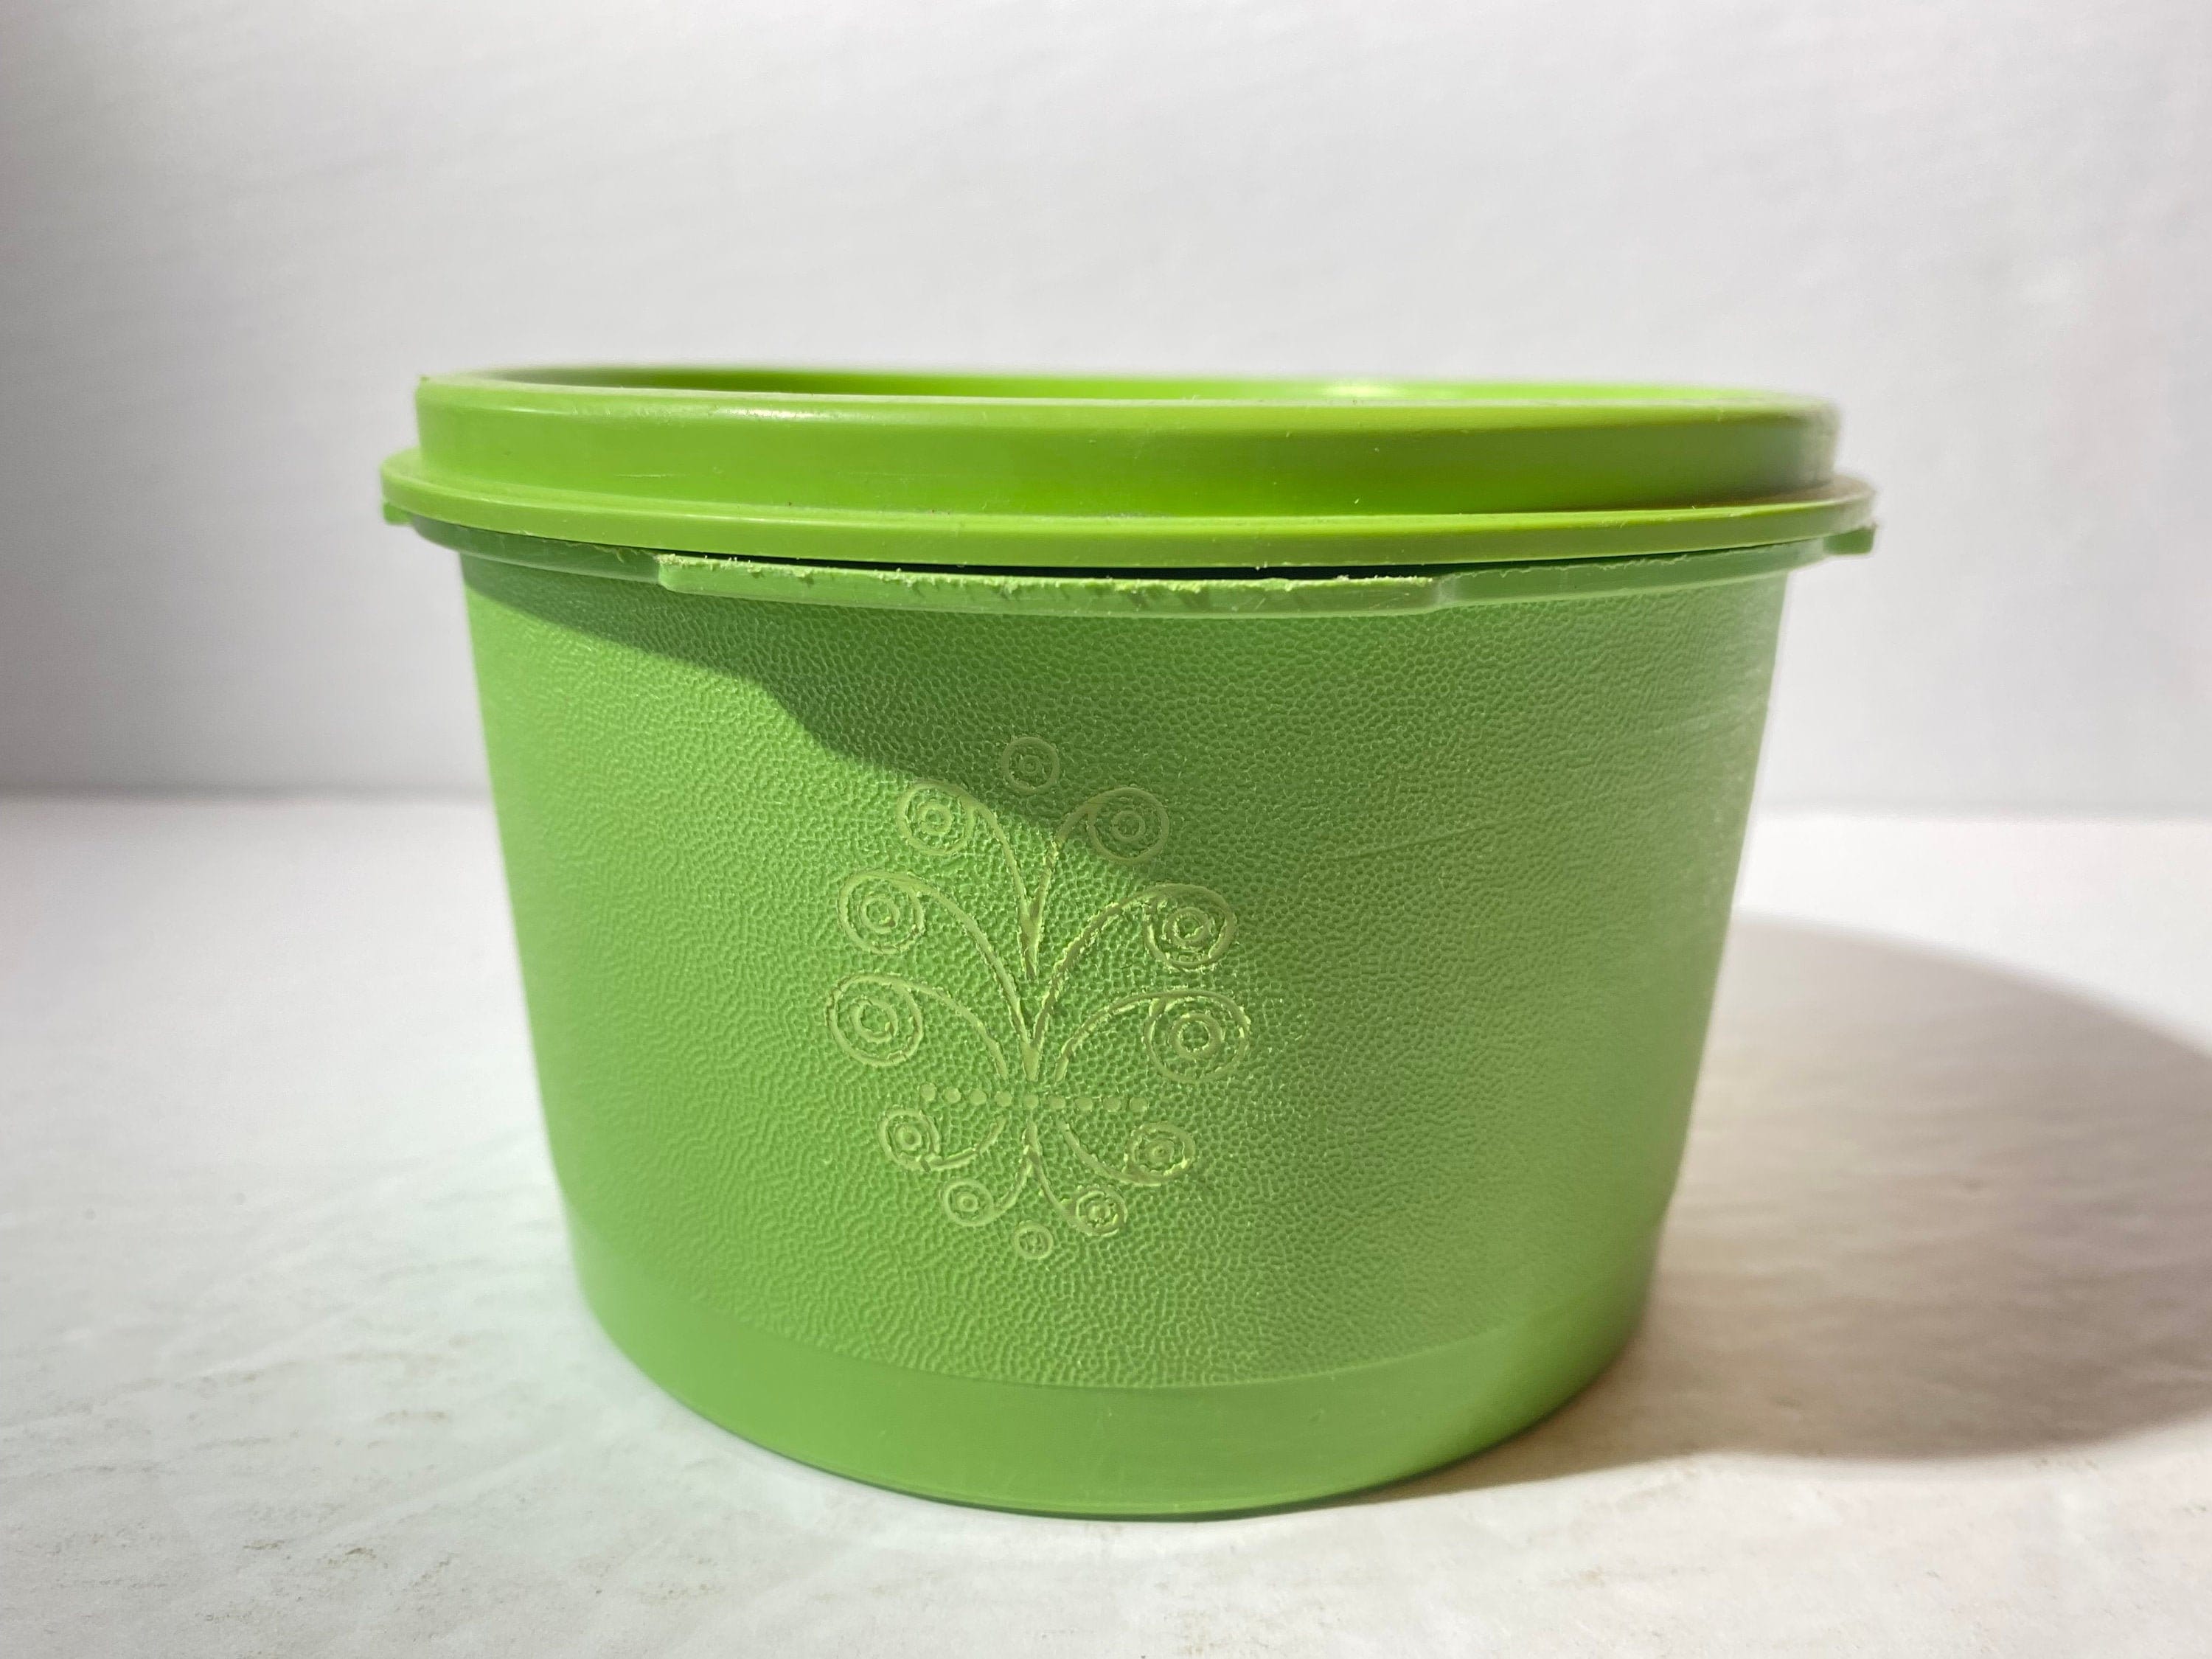 Vintage Tupperware Apple Green Set Of Two Canisters W/ Lids